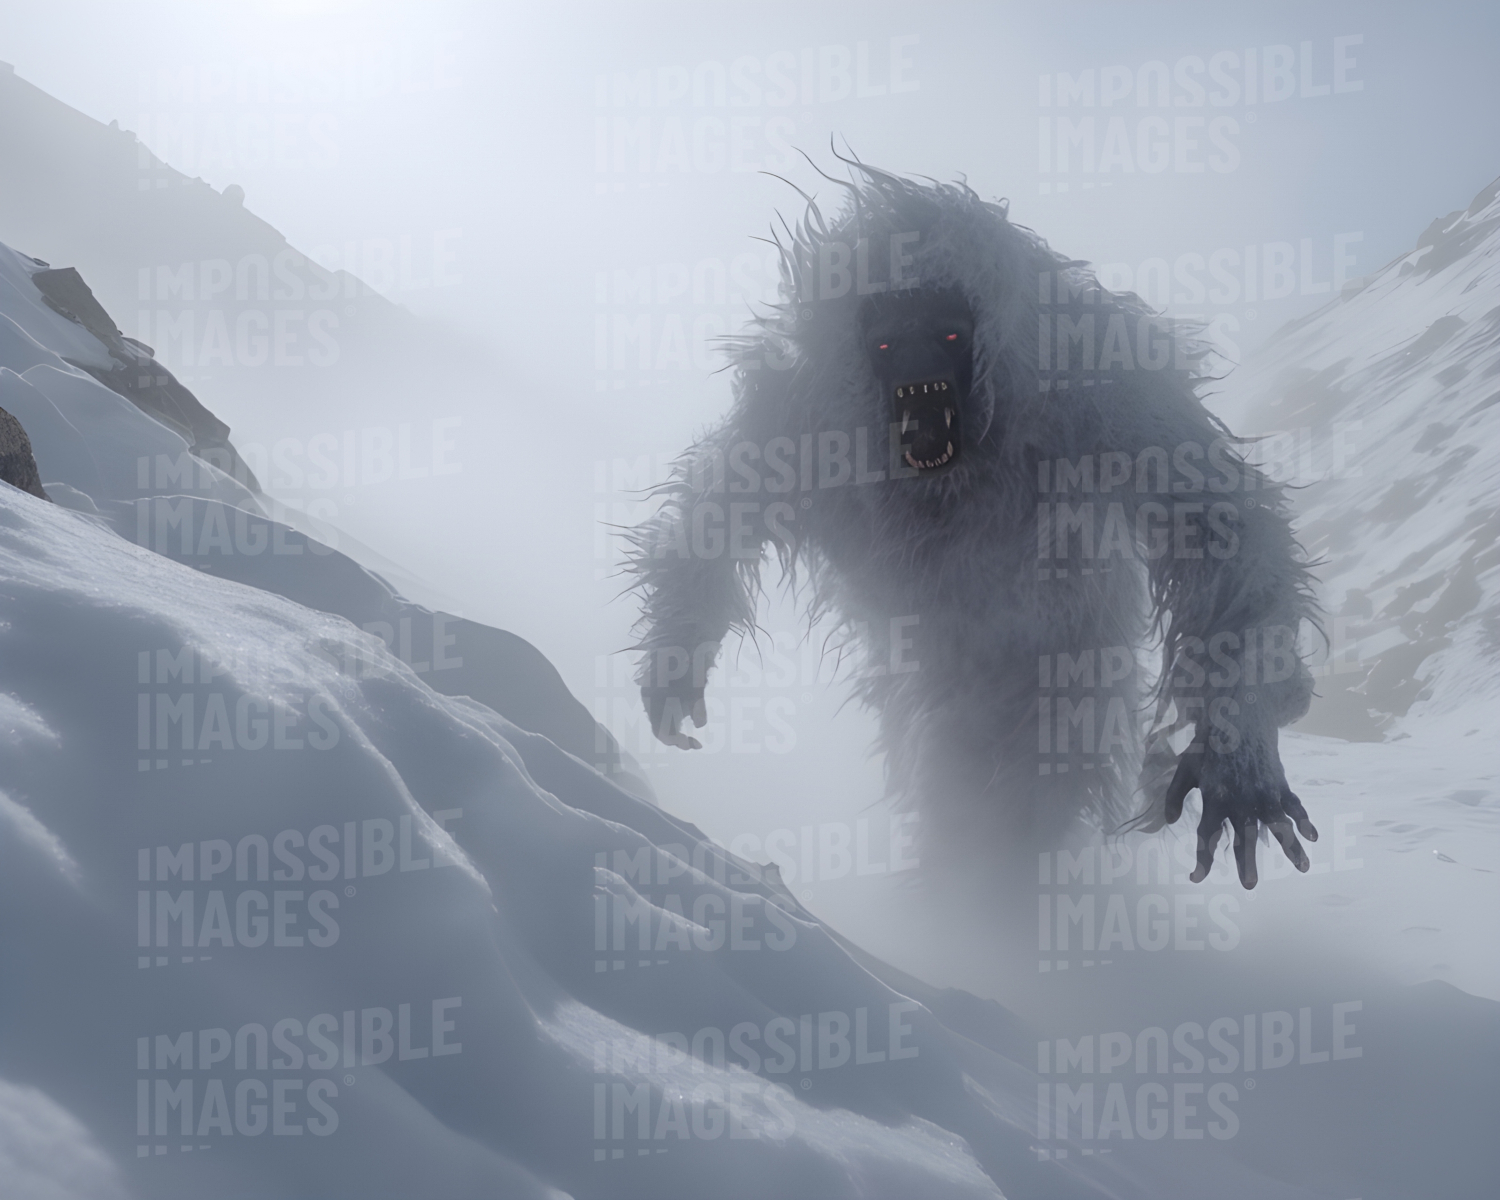 A yeti in a blizzard